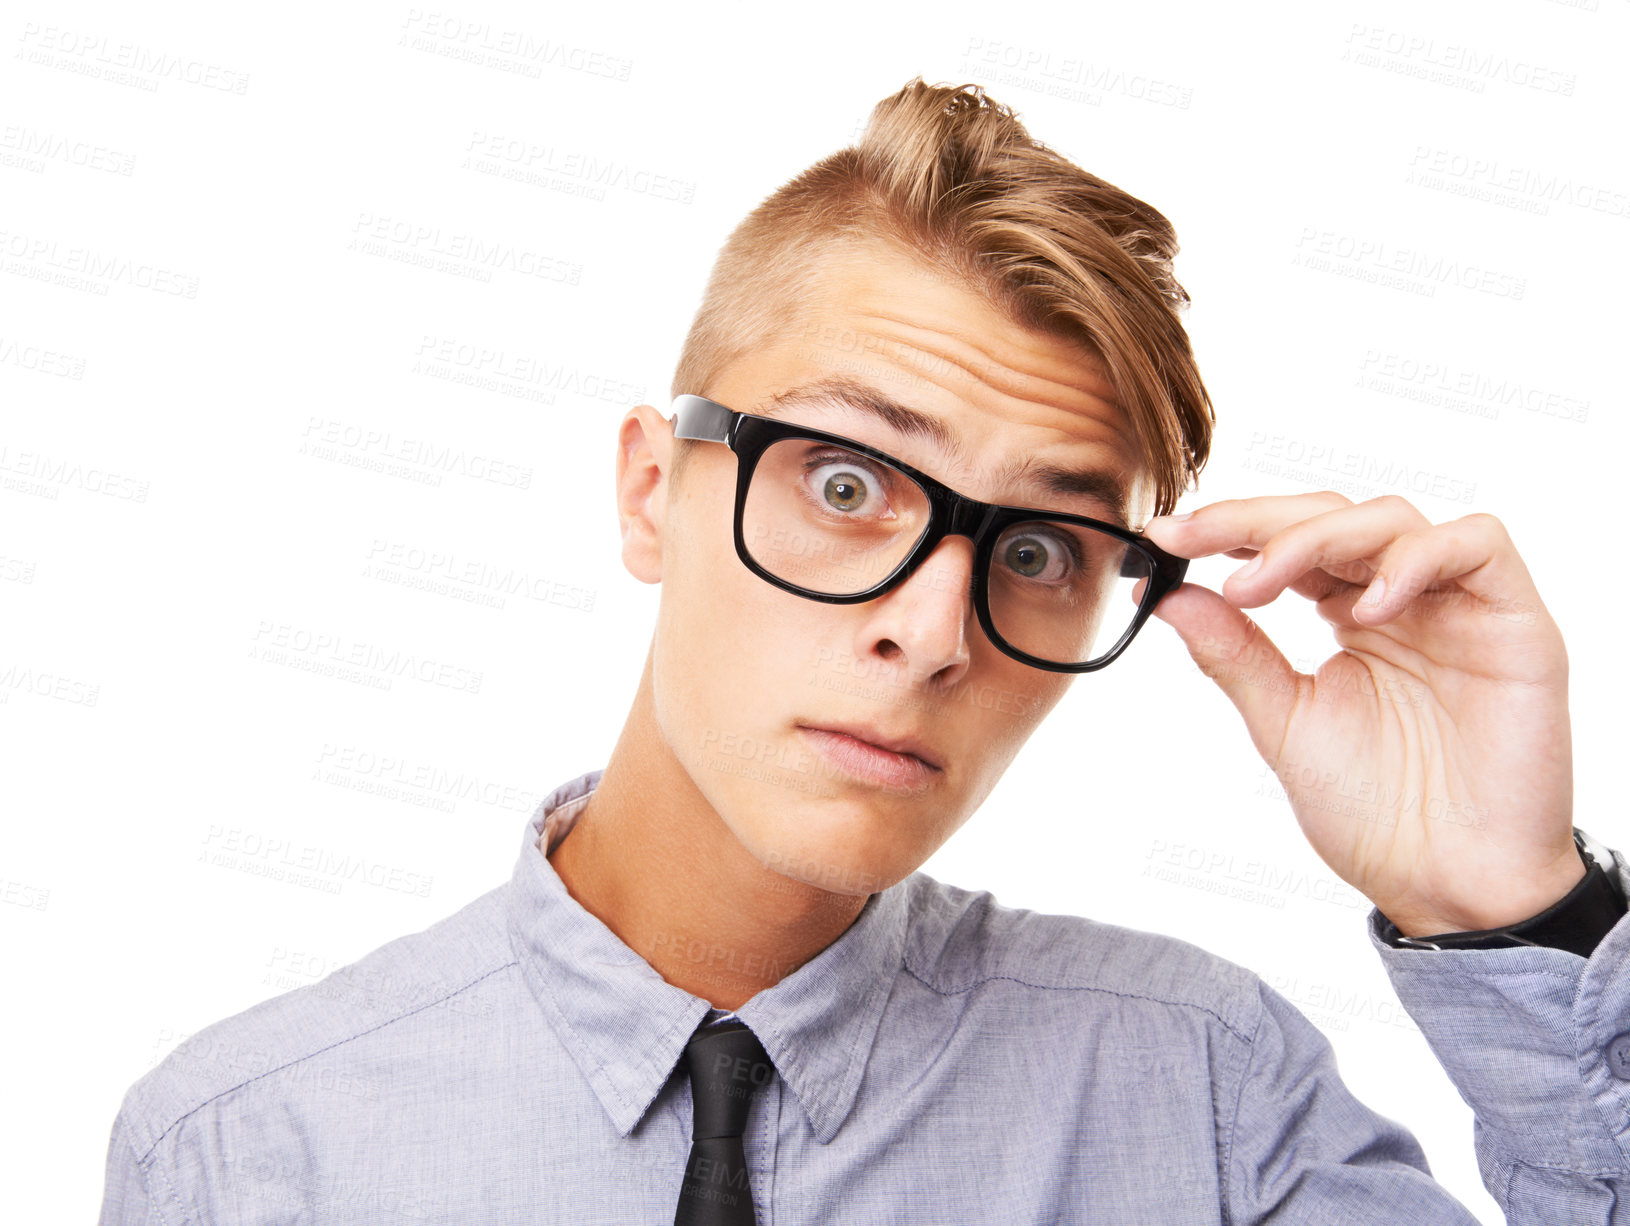 Buy stock photo Studio portrait of an expressive young man wearing glasses isolated on white